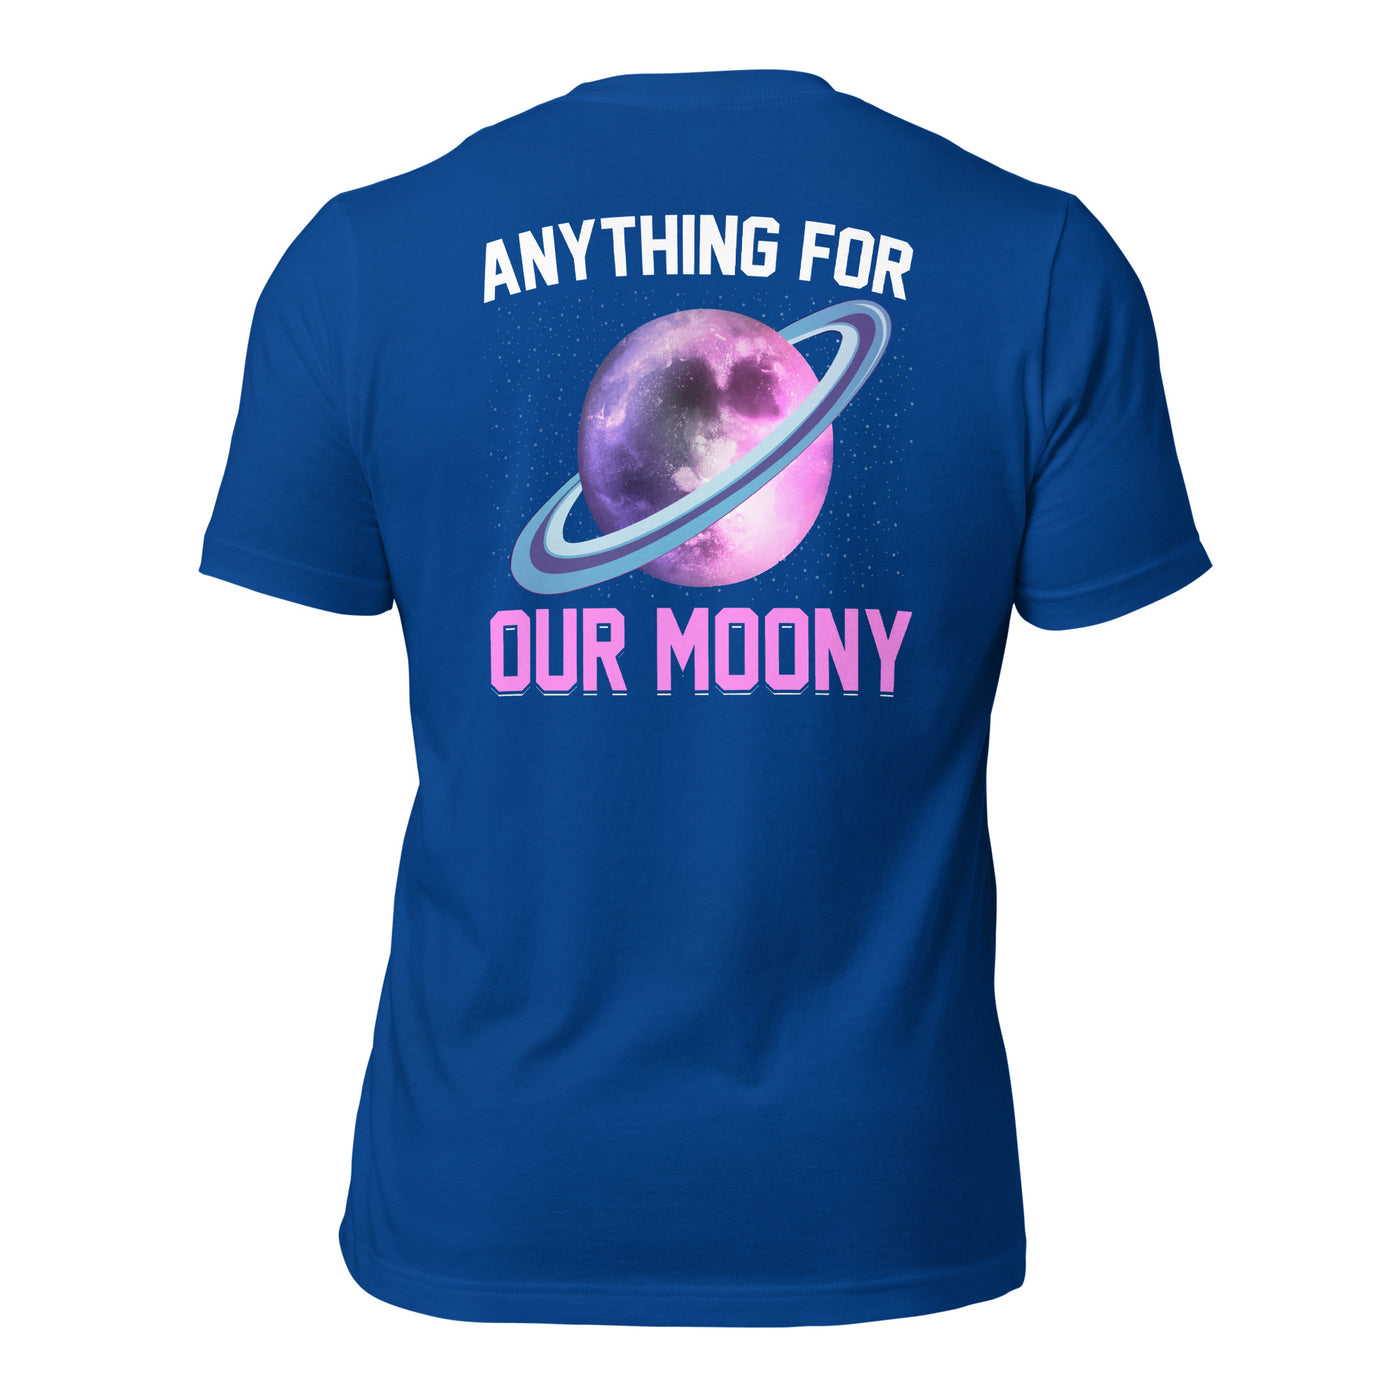 Anything for our moony - Unisex t-shirt (back print)